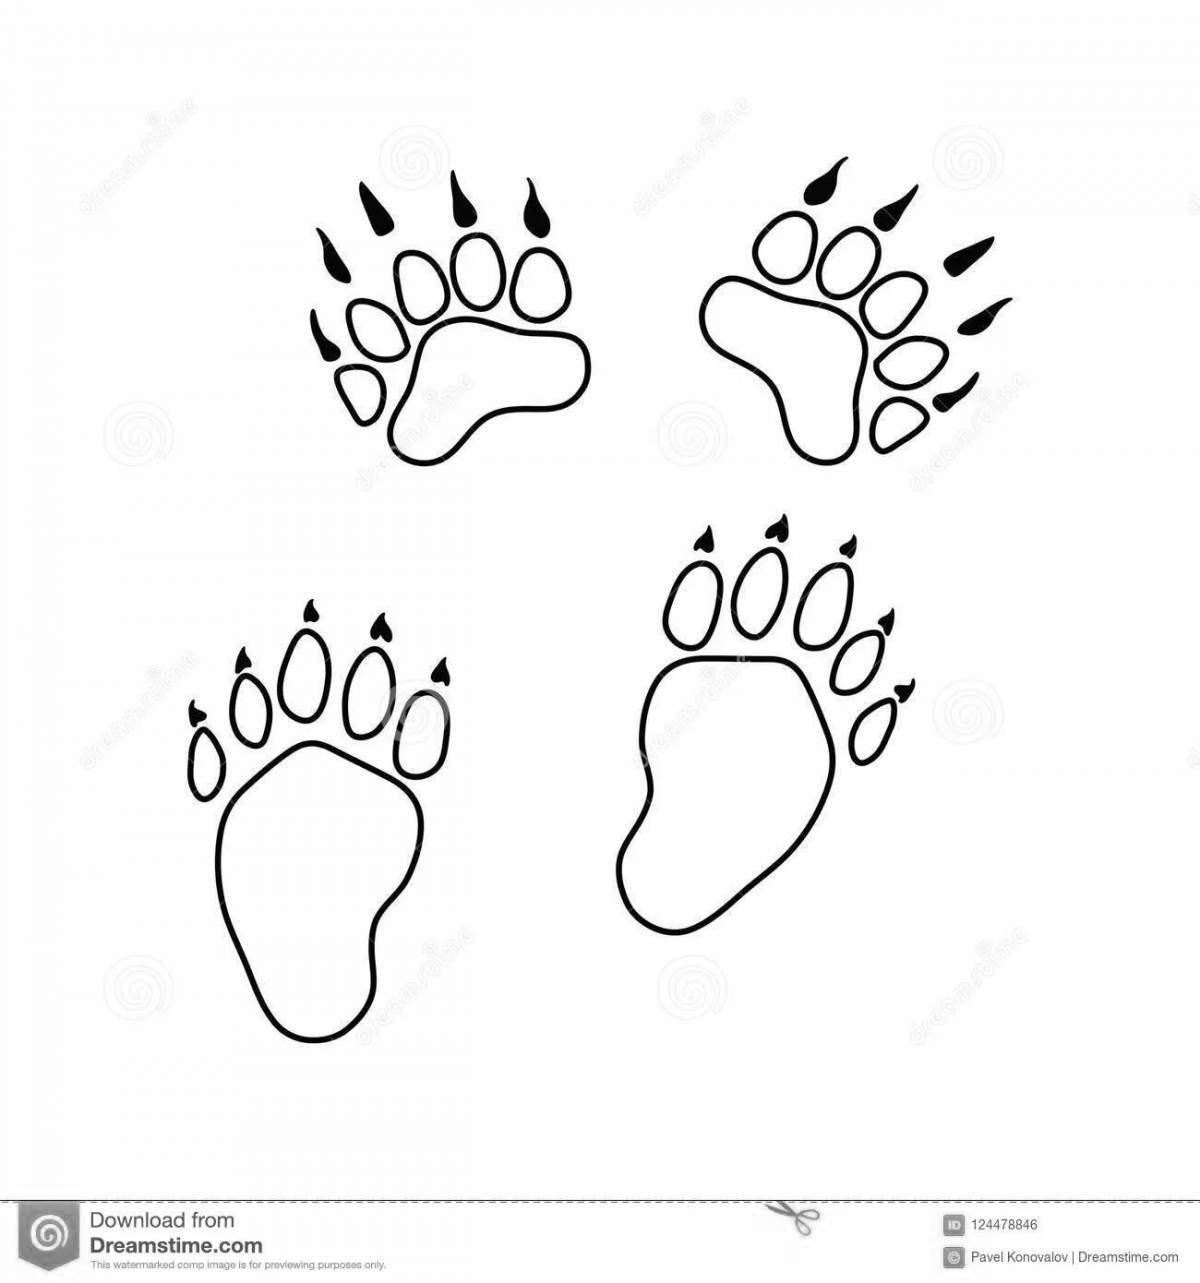 Fascinating footprints on the snow coloring page